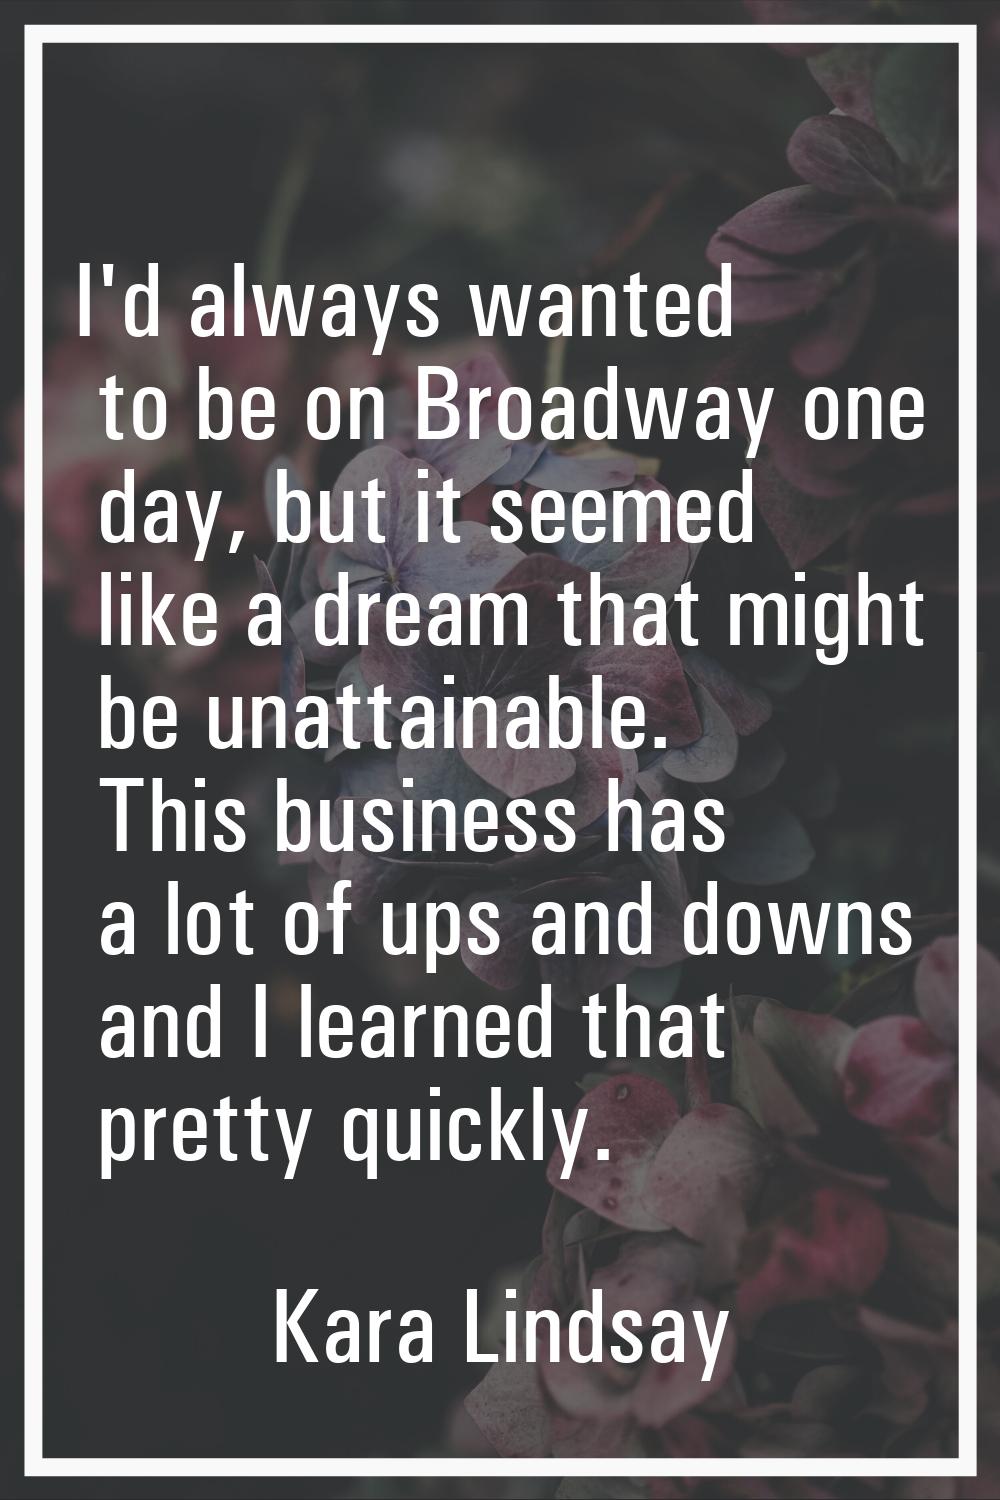 I'd always wanted to be on Broadway one day, but it seemed like a dream that might be unattainable.